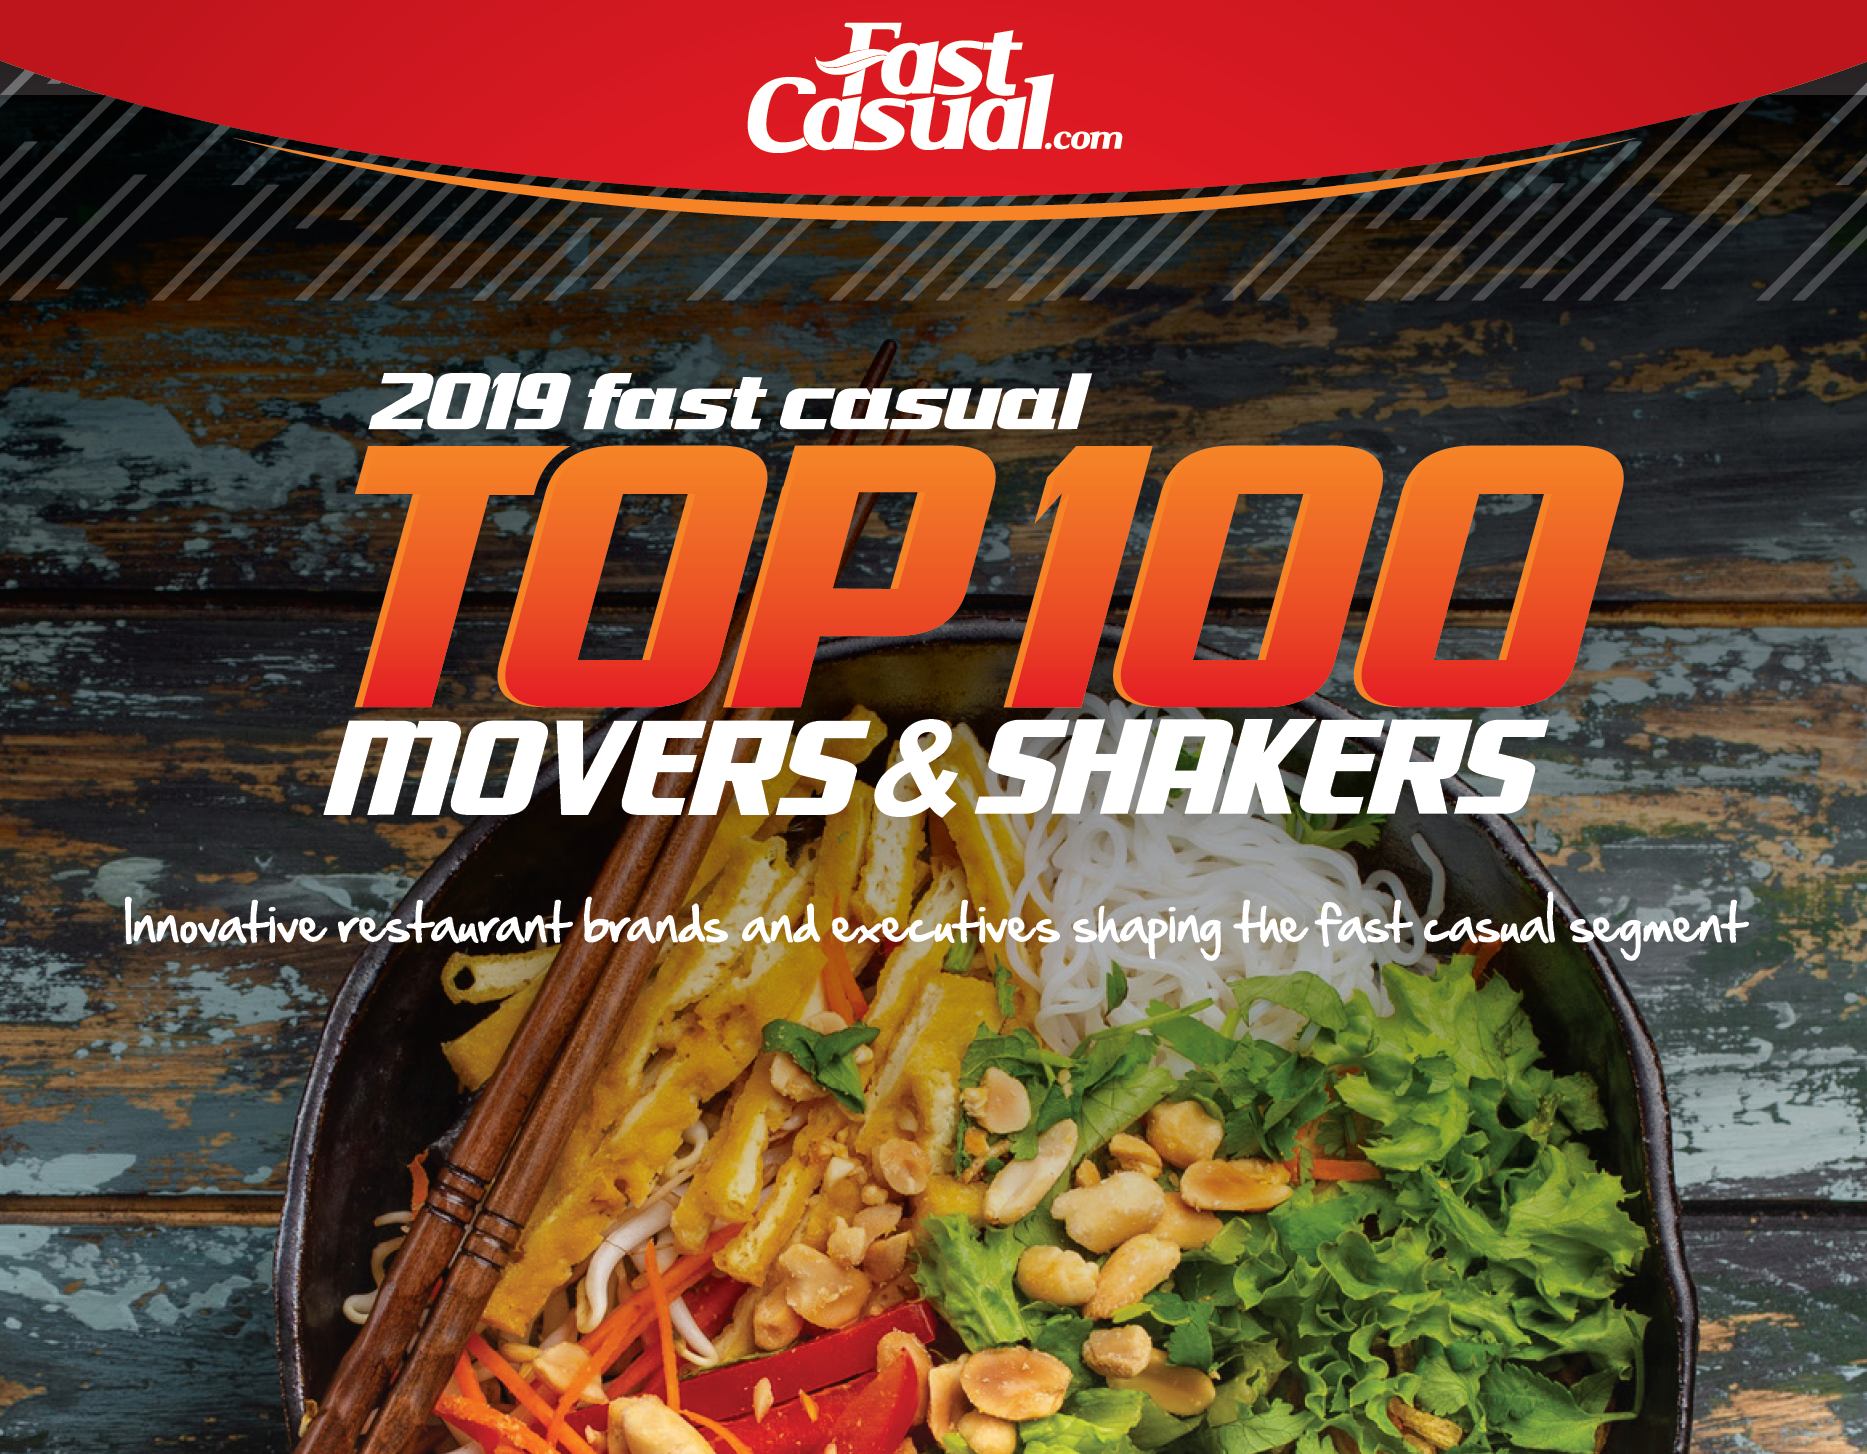 2019 Fast Casual Top 100 Movers & Shakers